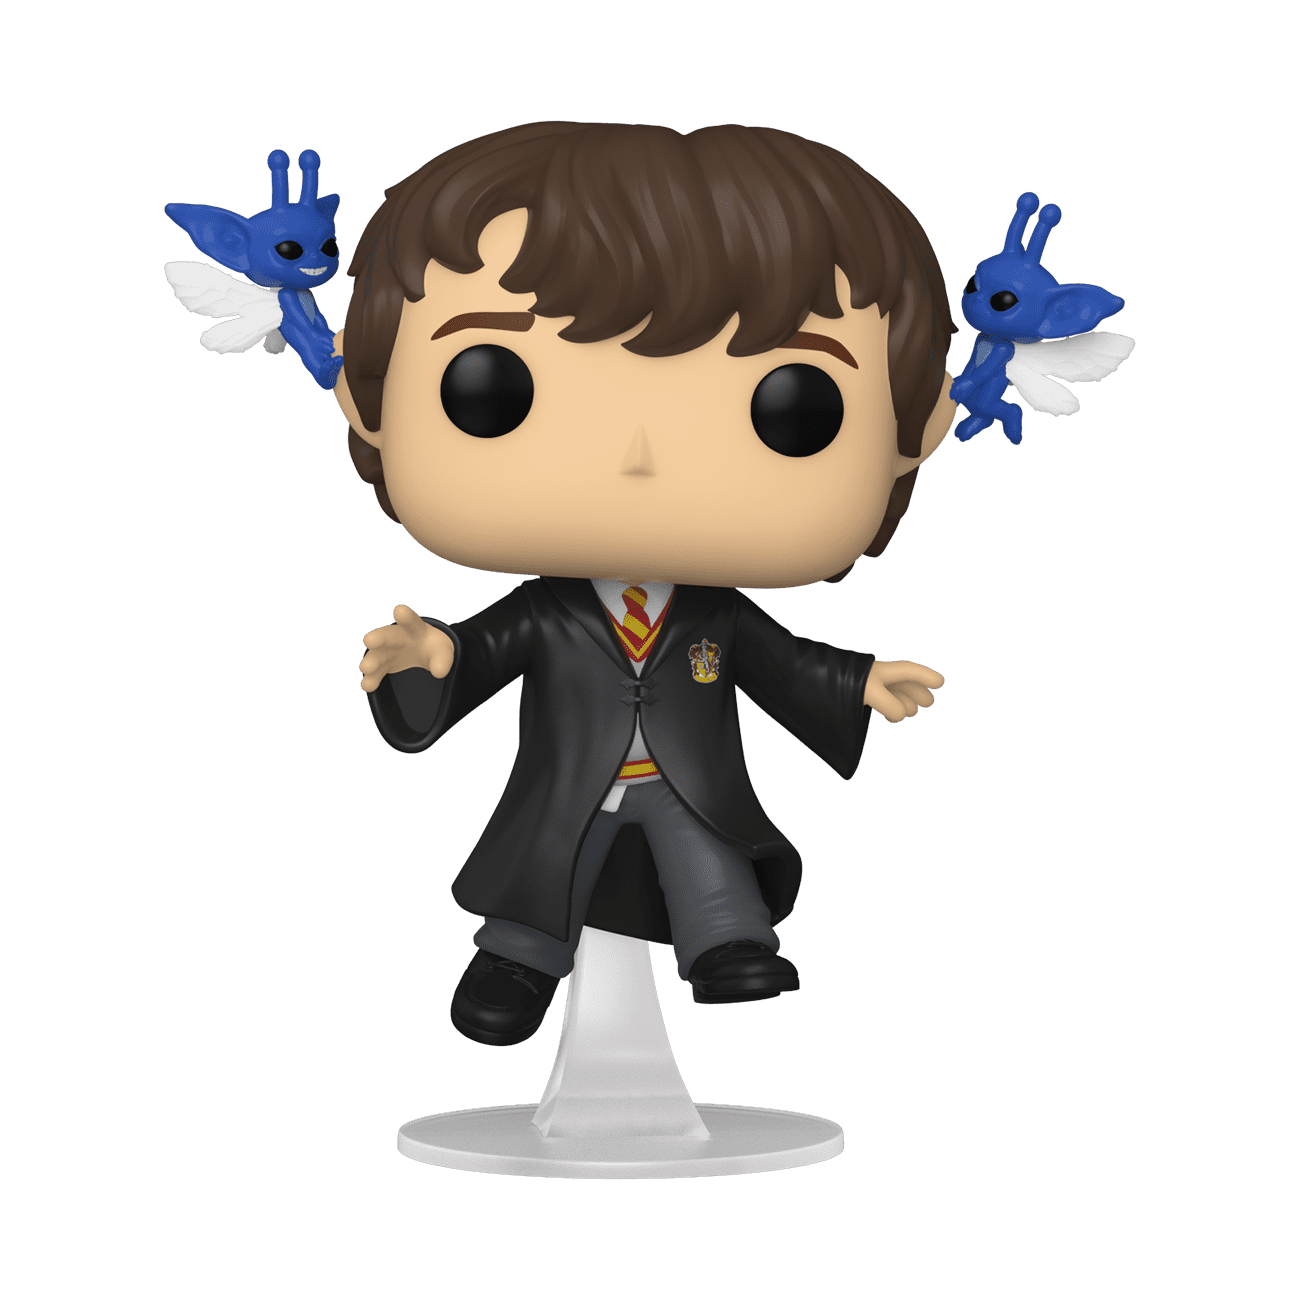 Funko Pop! Movies: Harry Potter Neville with Pixies Vinyl Figure 2022 Shared Convention Exclusive) - Walmart.com